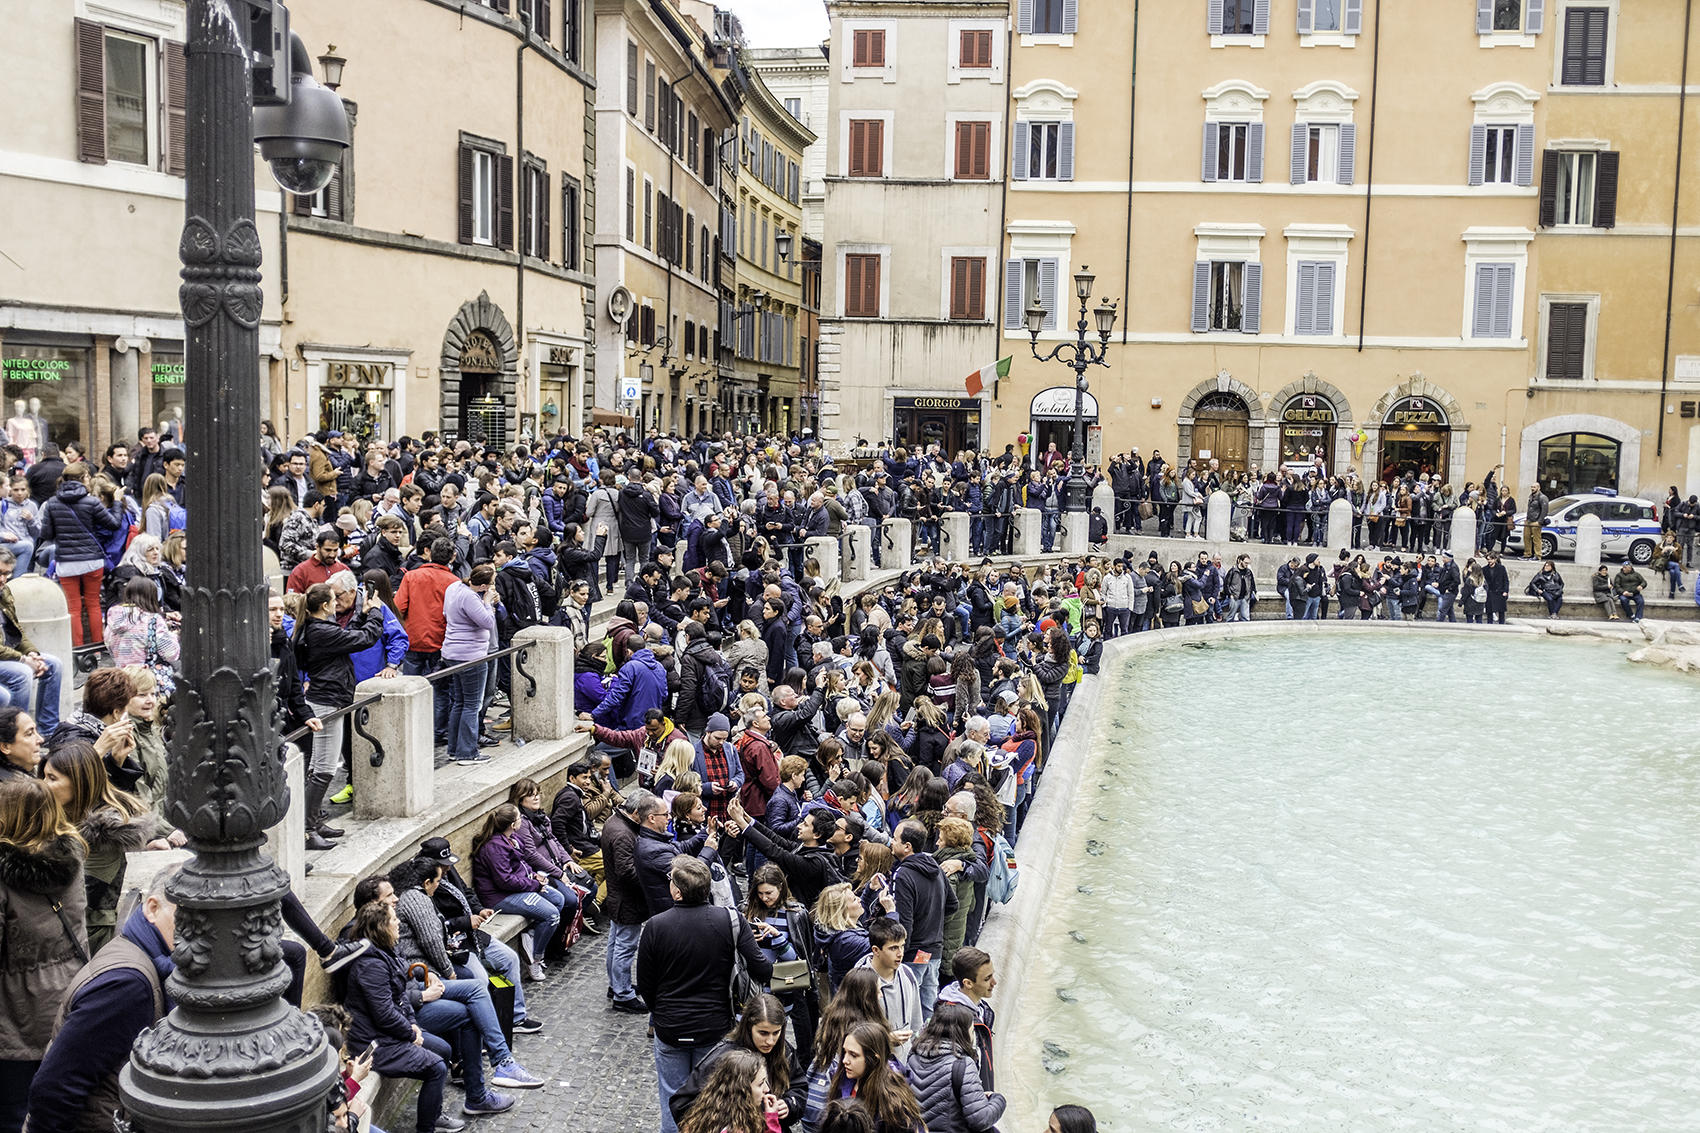 Tourist and pickpockets at the Trevi Fountain